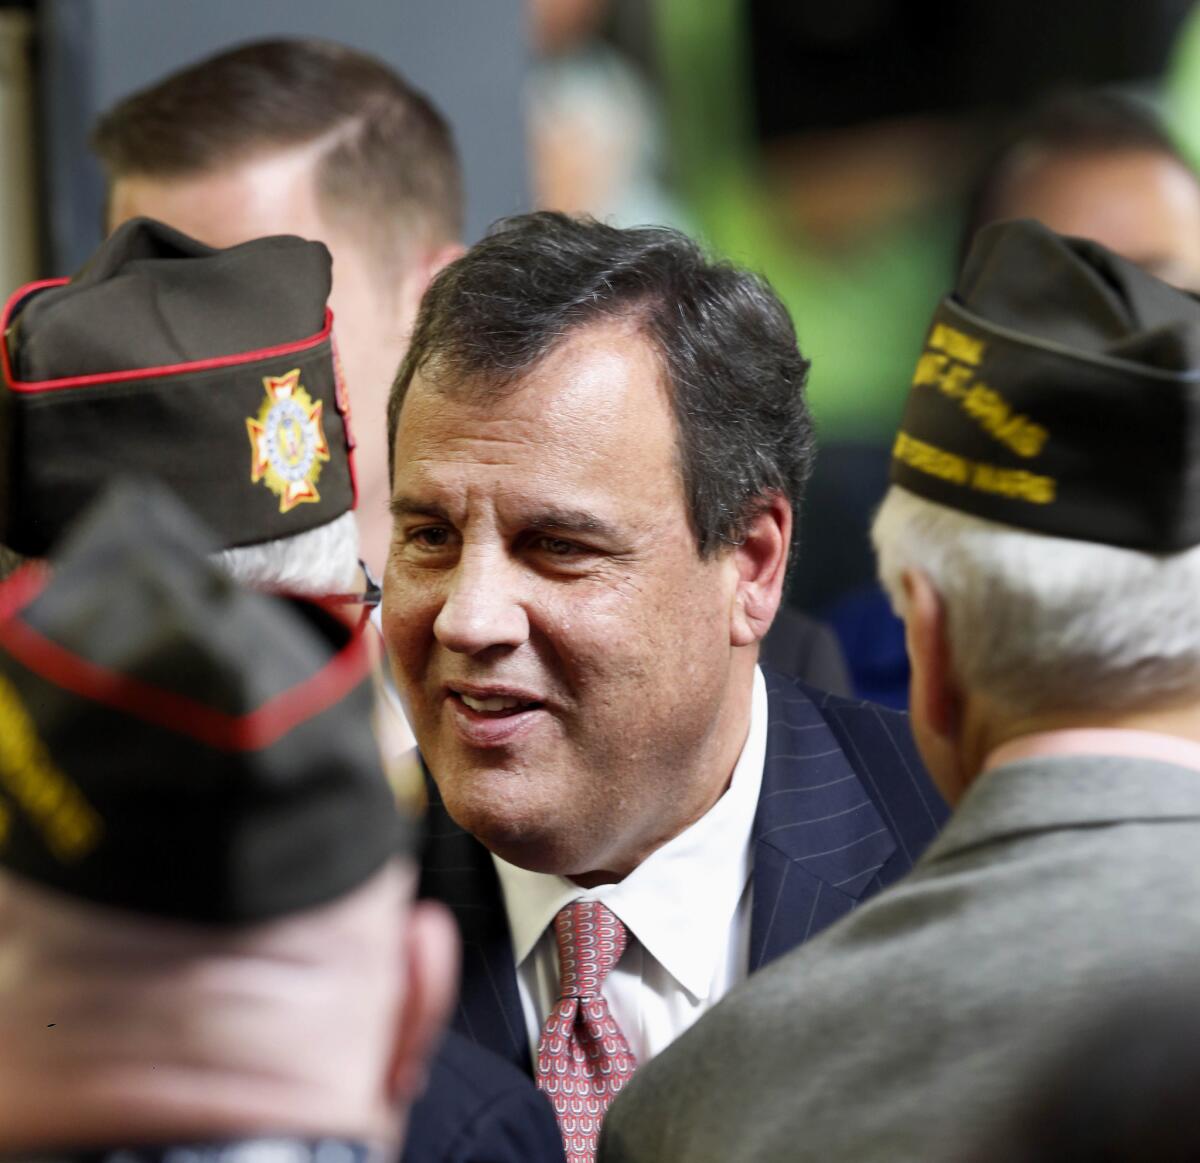 Republican presidential candidate, New Jersey Gov. Chris Christie greets voters after speaking at a No Labels Problem Solver convention, Monday, Oct. 12, 2015, in Manchester, N..H (AP Photo/Jim Cole)